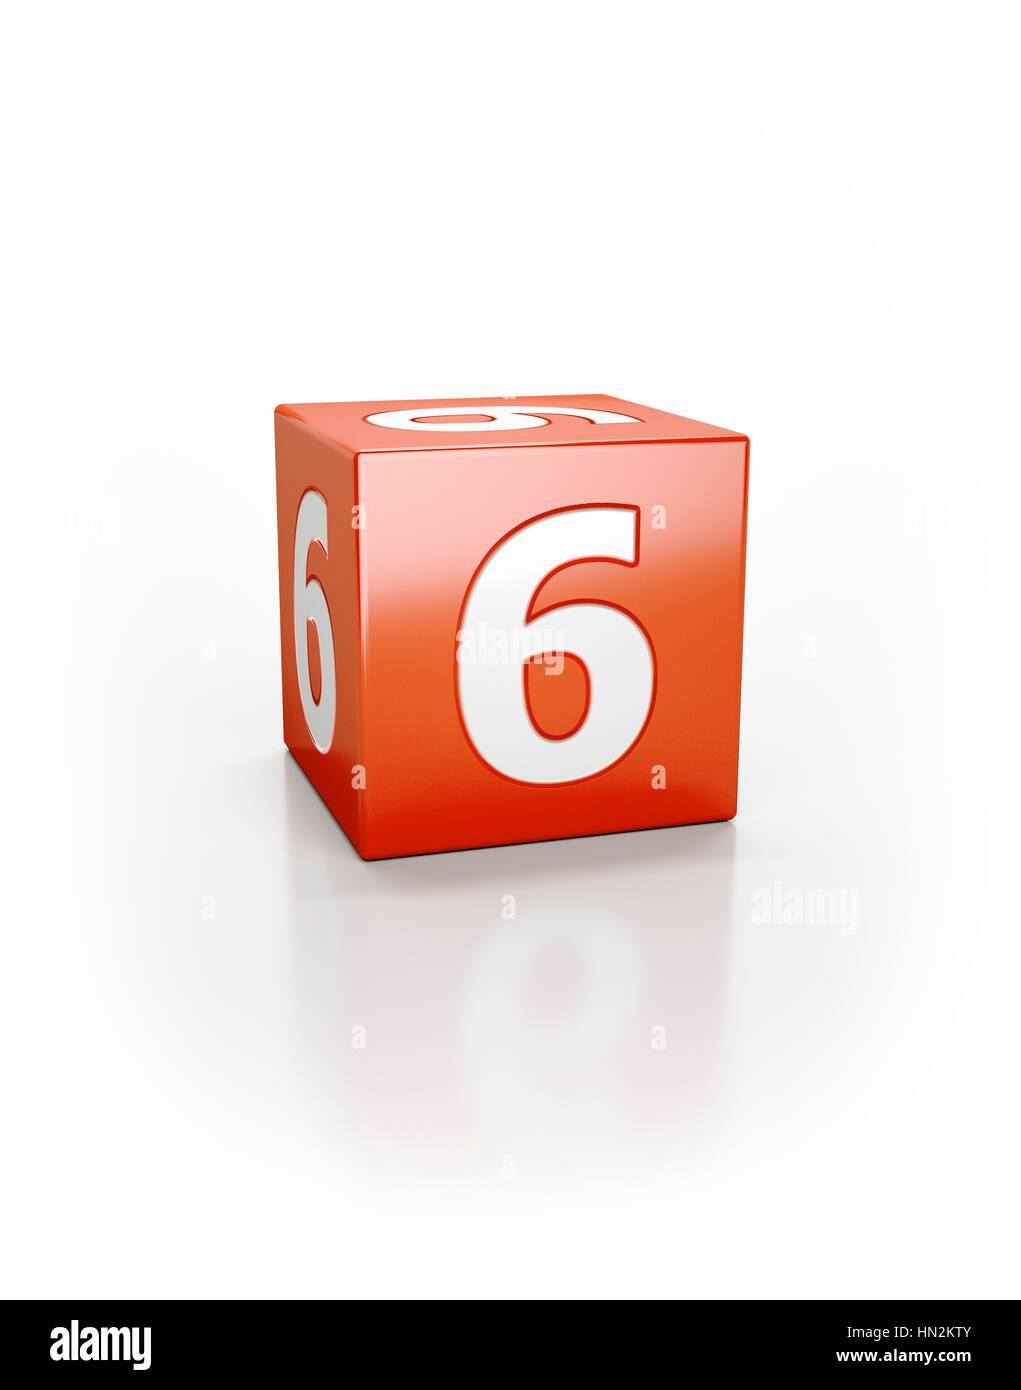 Red cube with the number six. Stock Photo